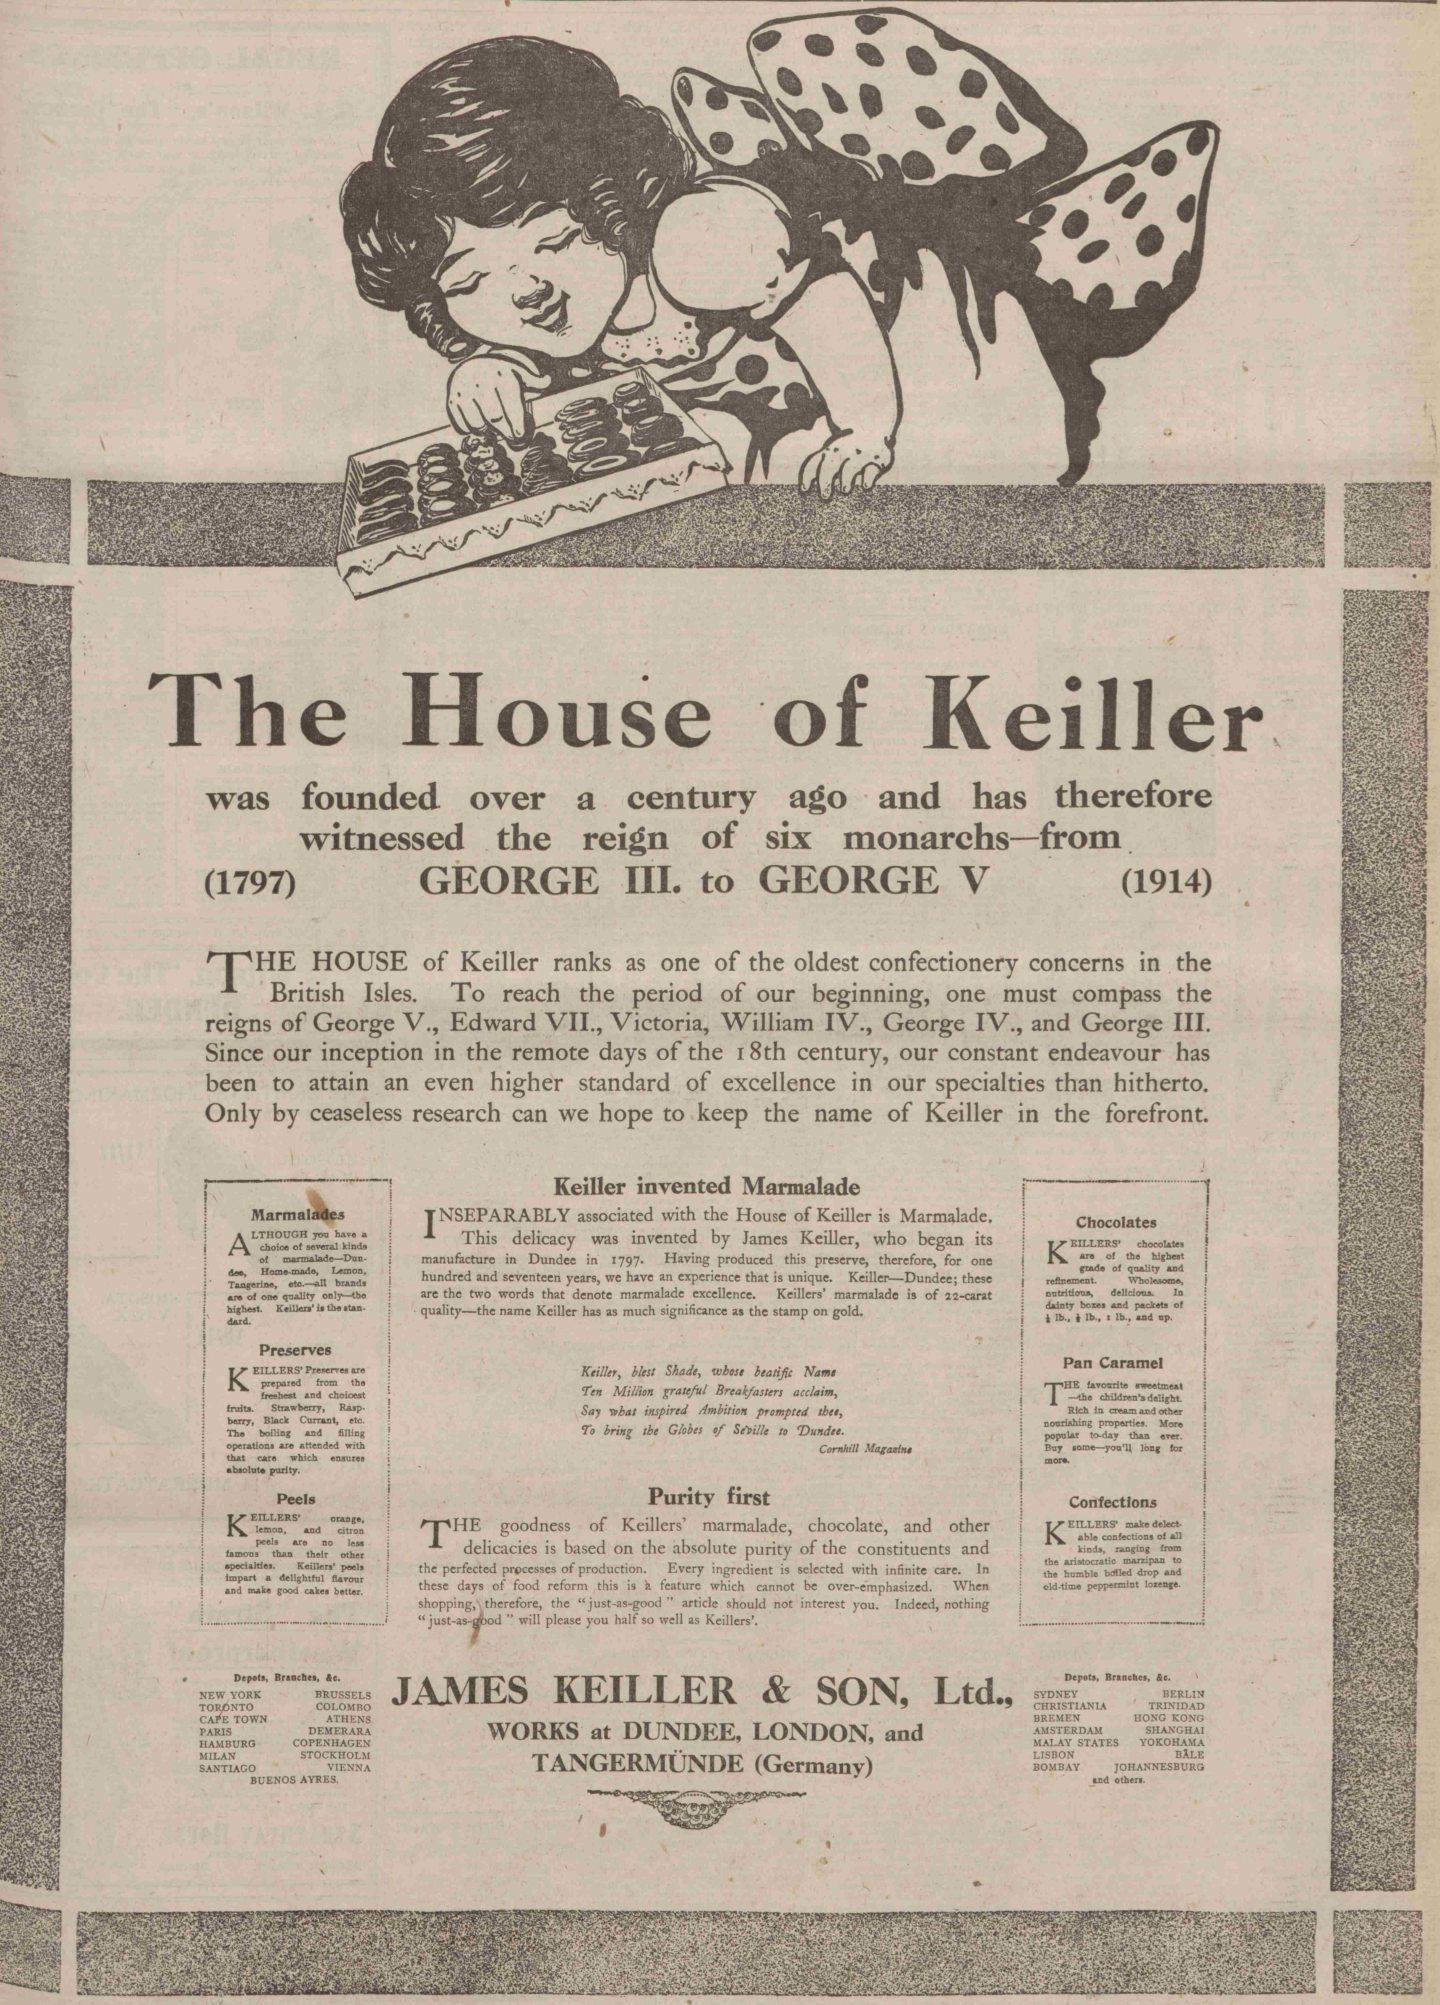 A company advert for Keiller's that appeared in The Courier in 1914. Image: DC Thomson.